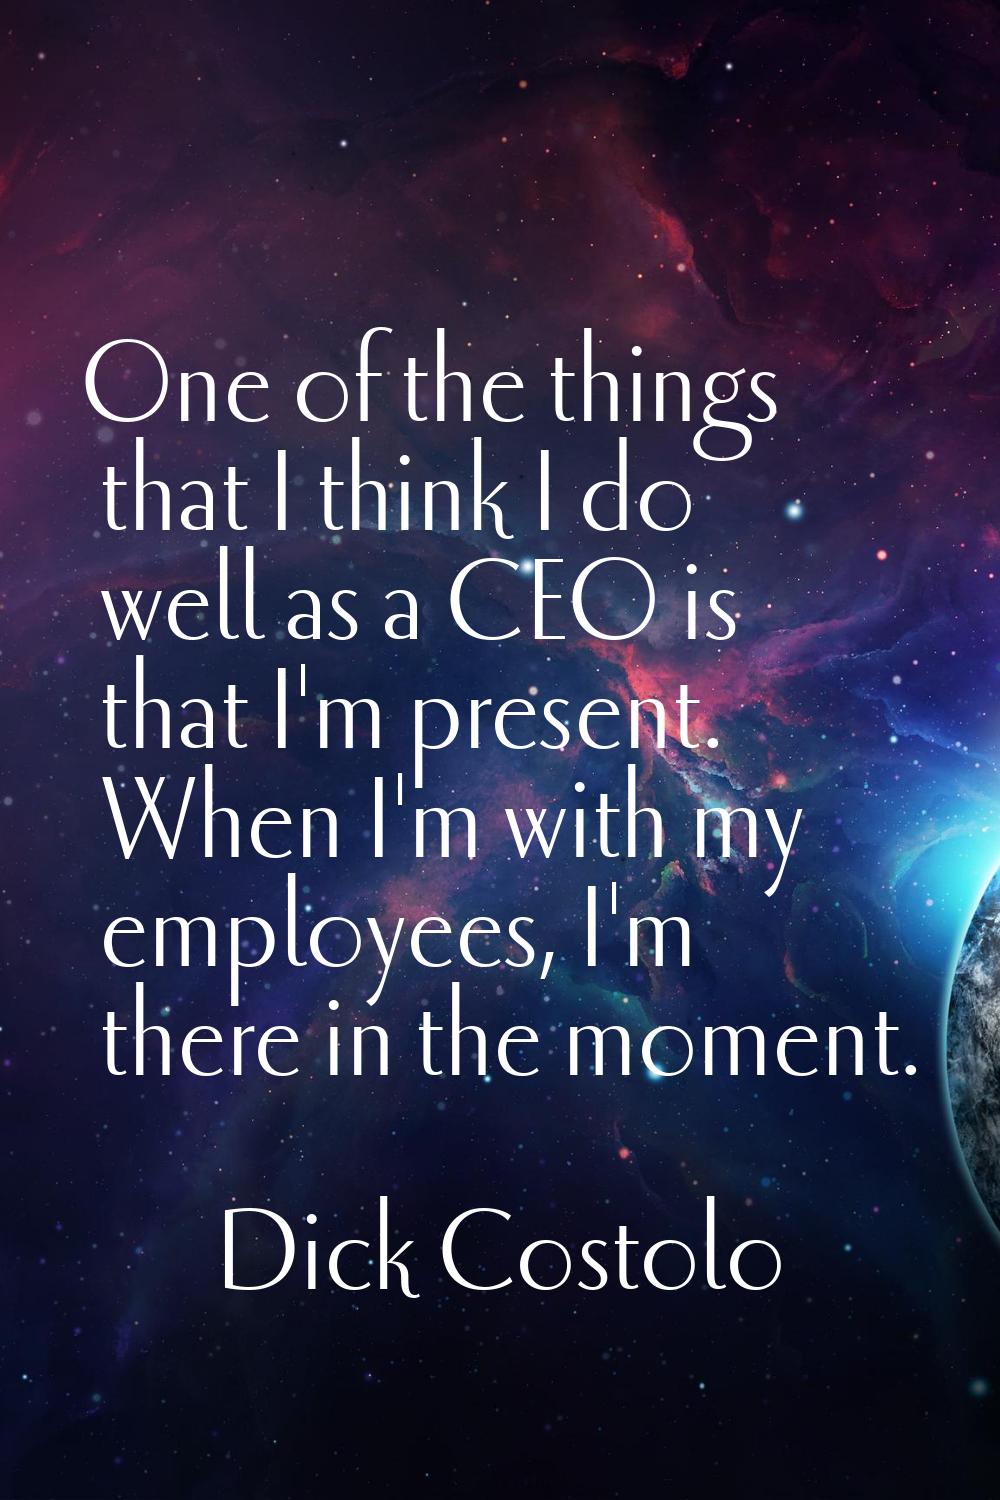 One of the things that I think I do well as a CEO is that I'm present. When I'm with my employees, 